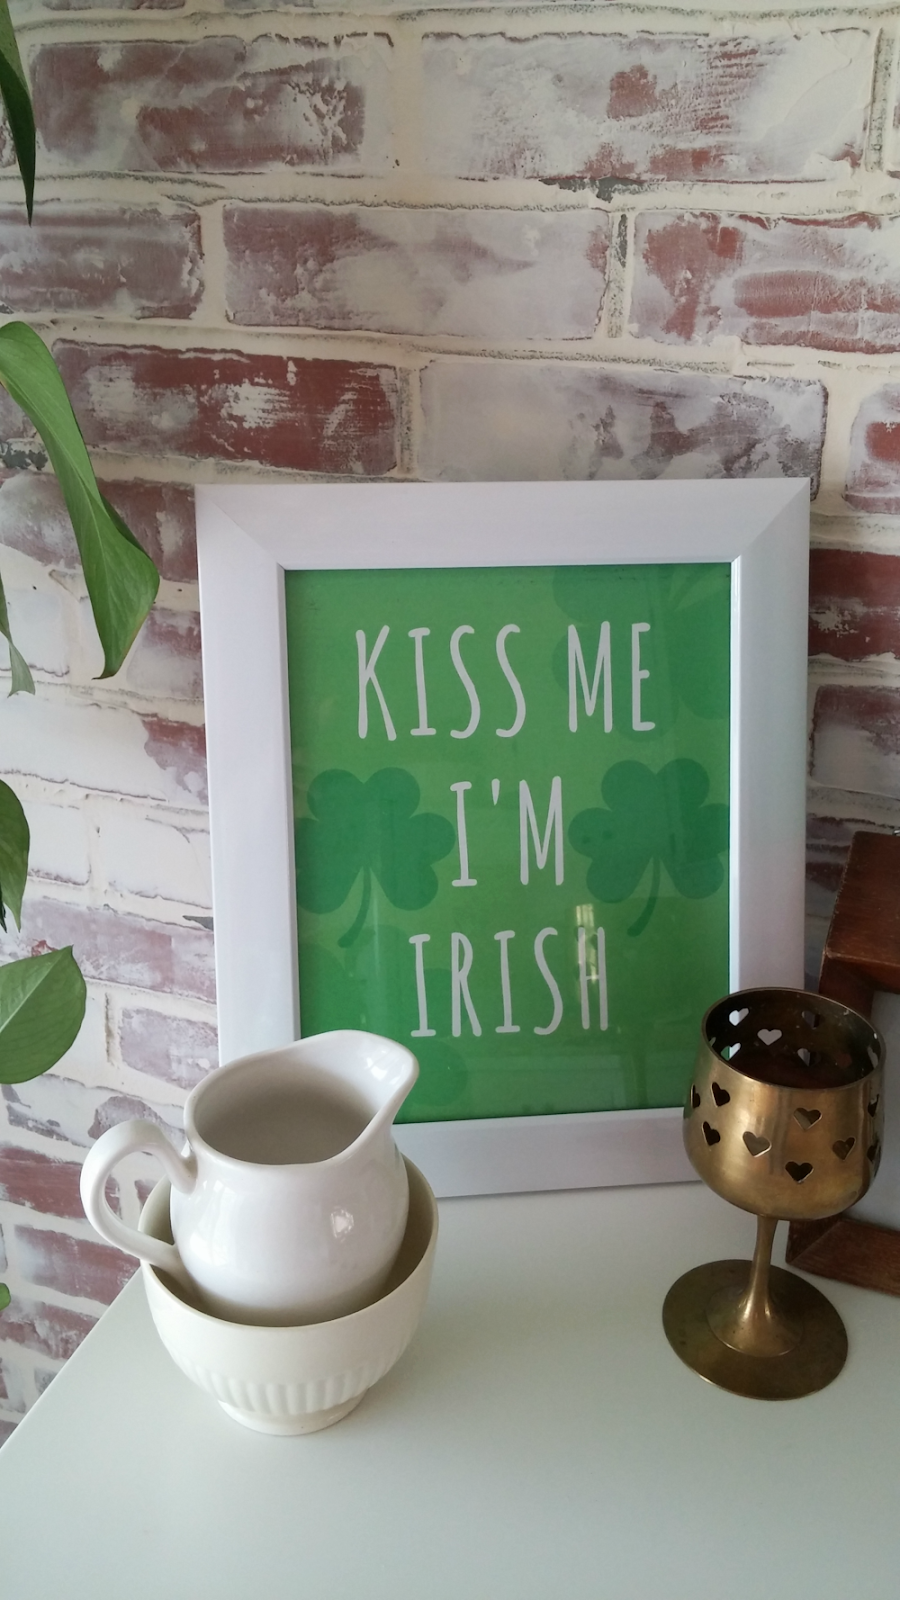 St. Patrick's Day sign